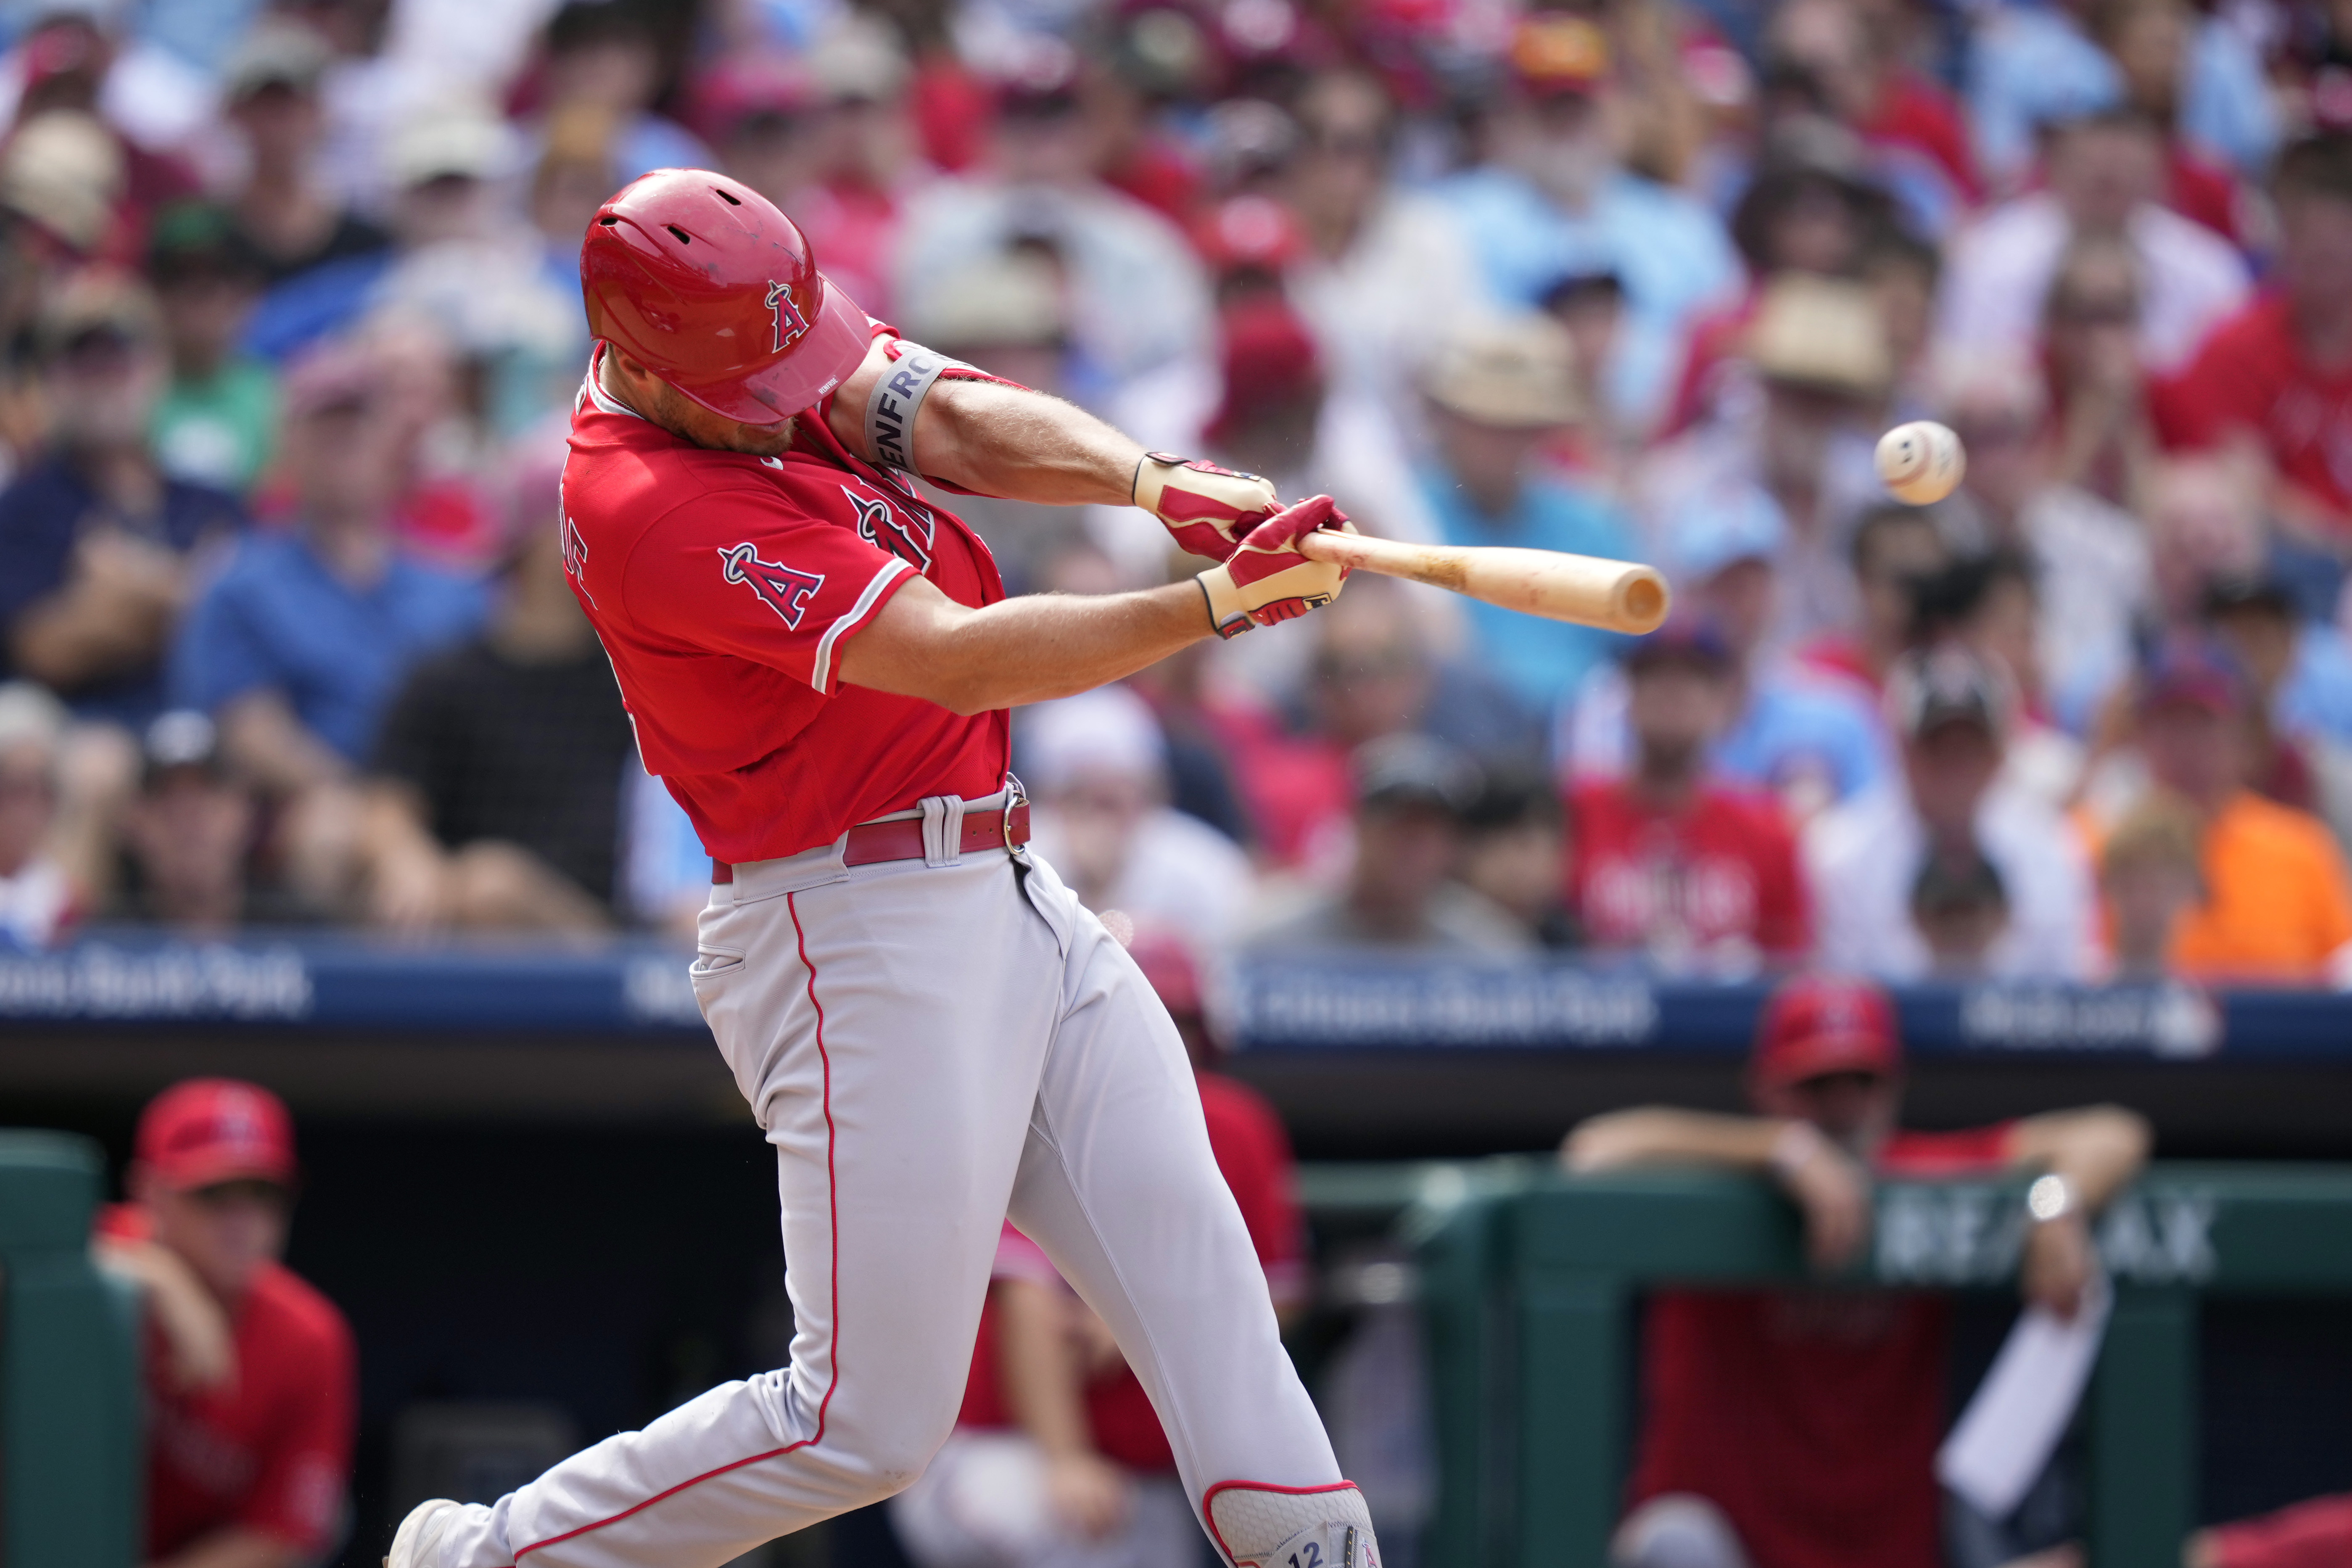 Reds claim Hunter Renfore, Harrison Bader on waivers amid playoff push